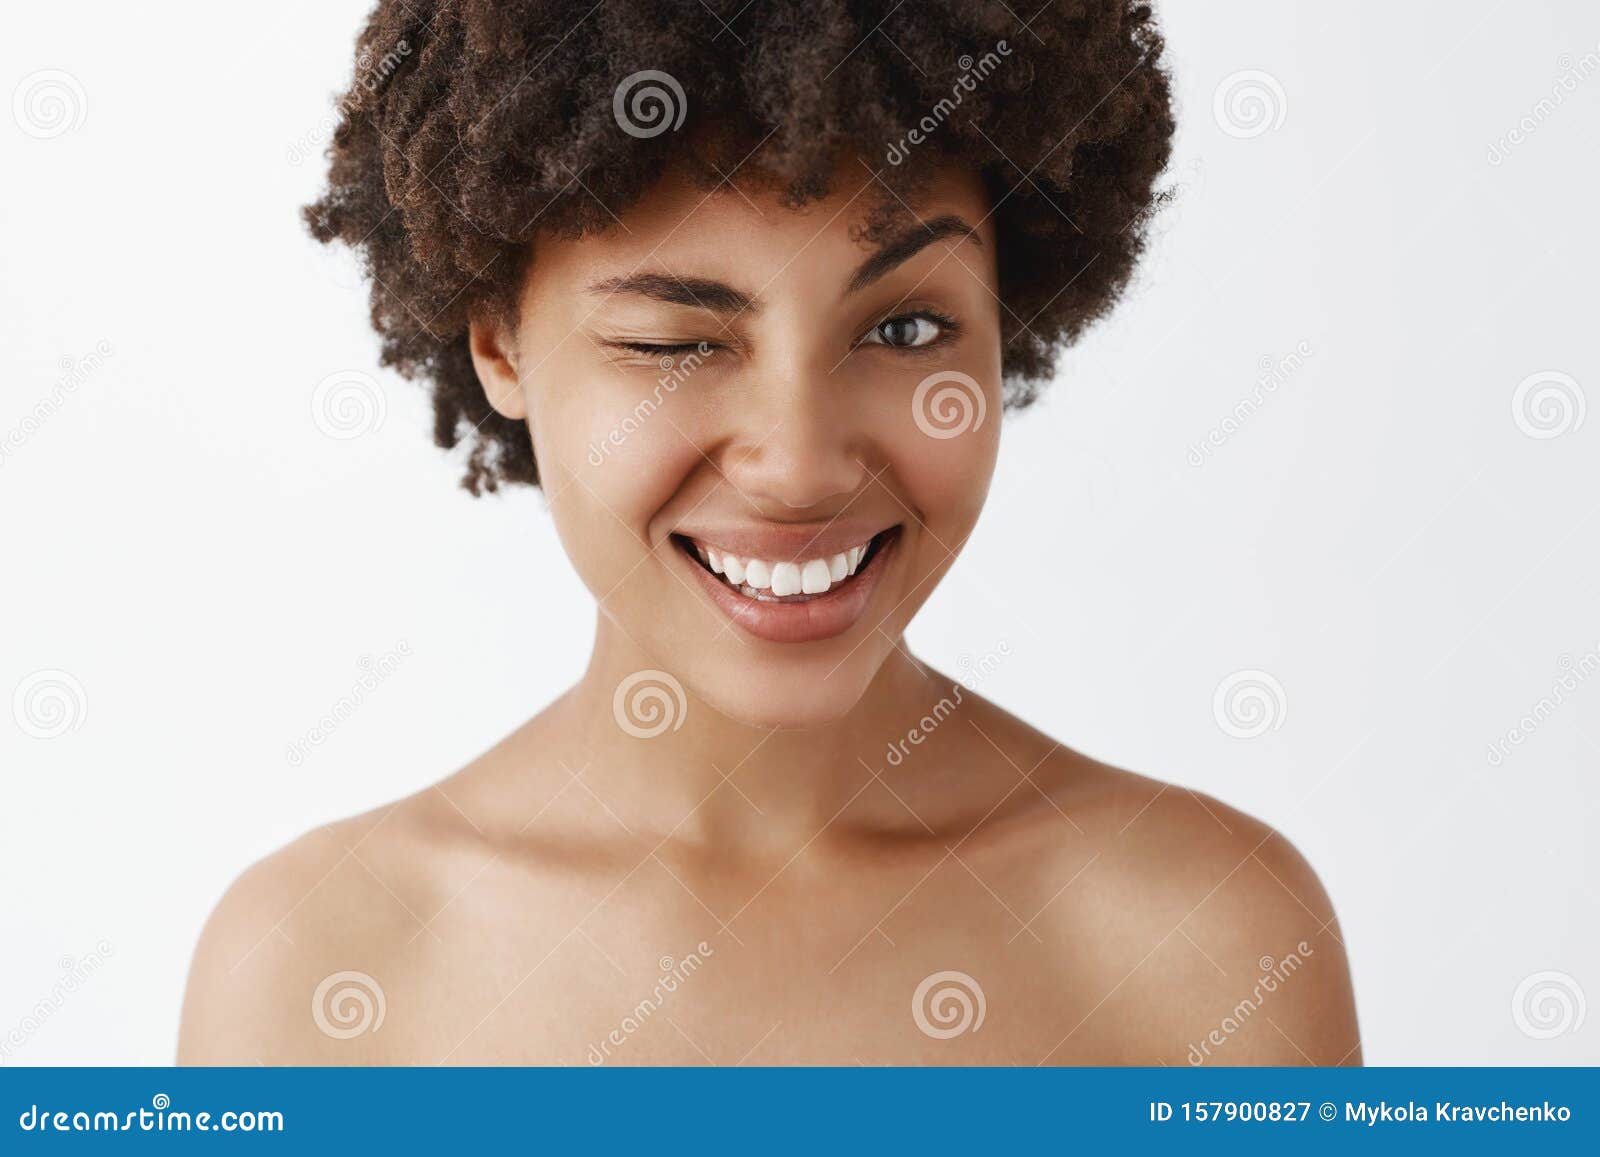 Close Up Shot Of Emotive Happy And Friendly Looking Attractive Dark Skinned Model With Afro